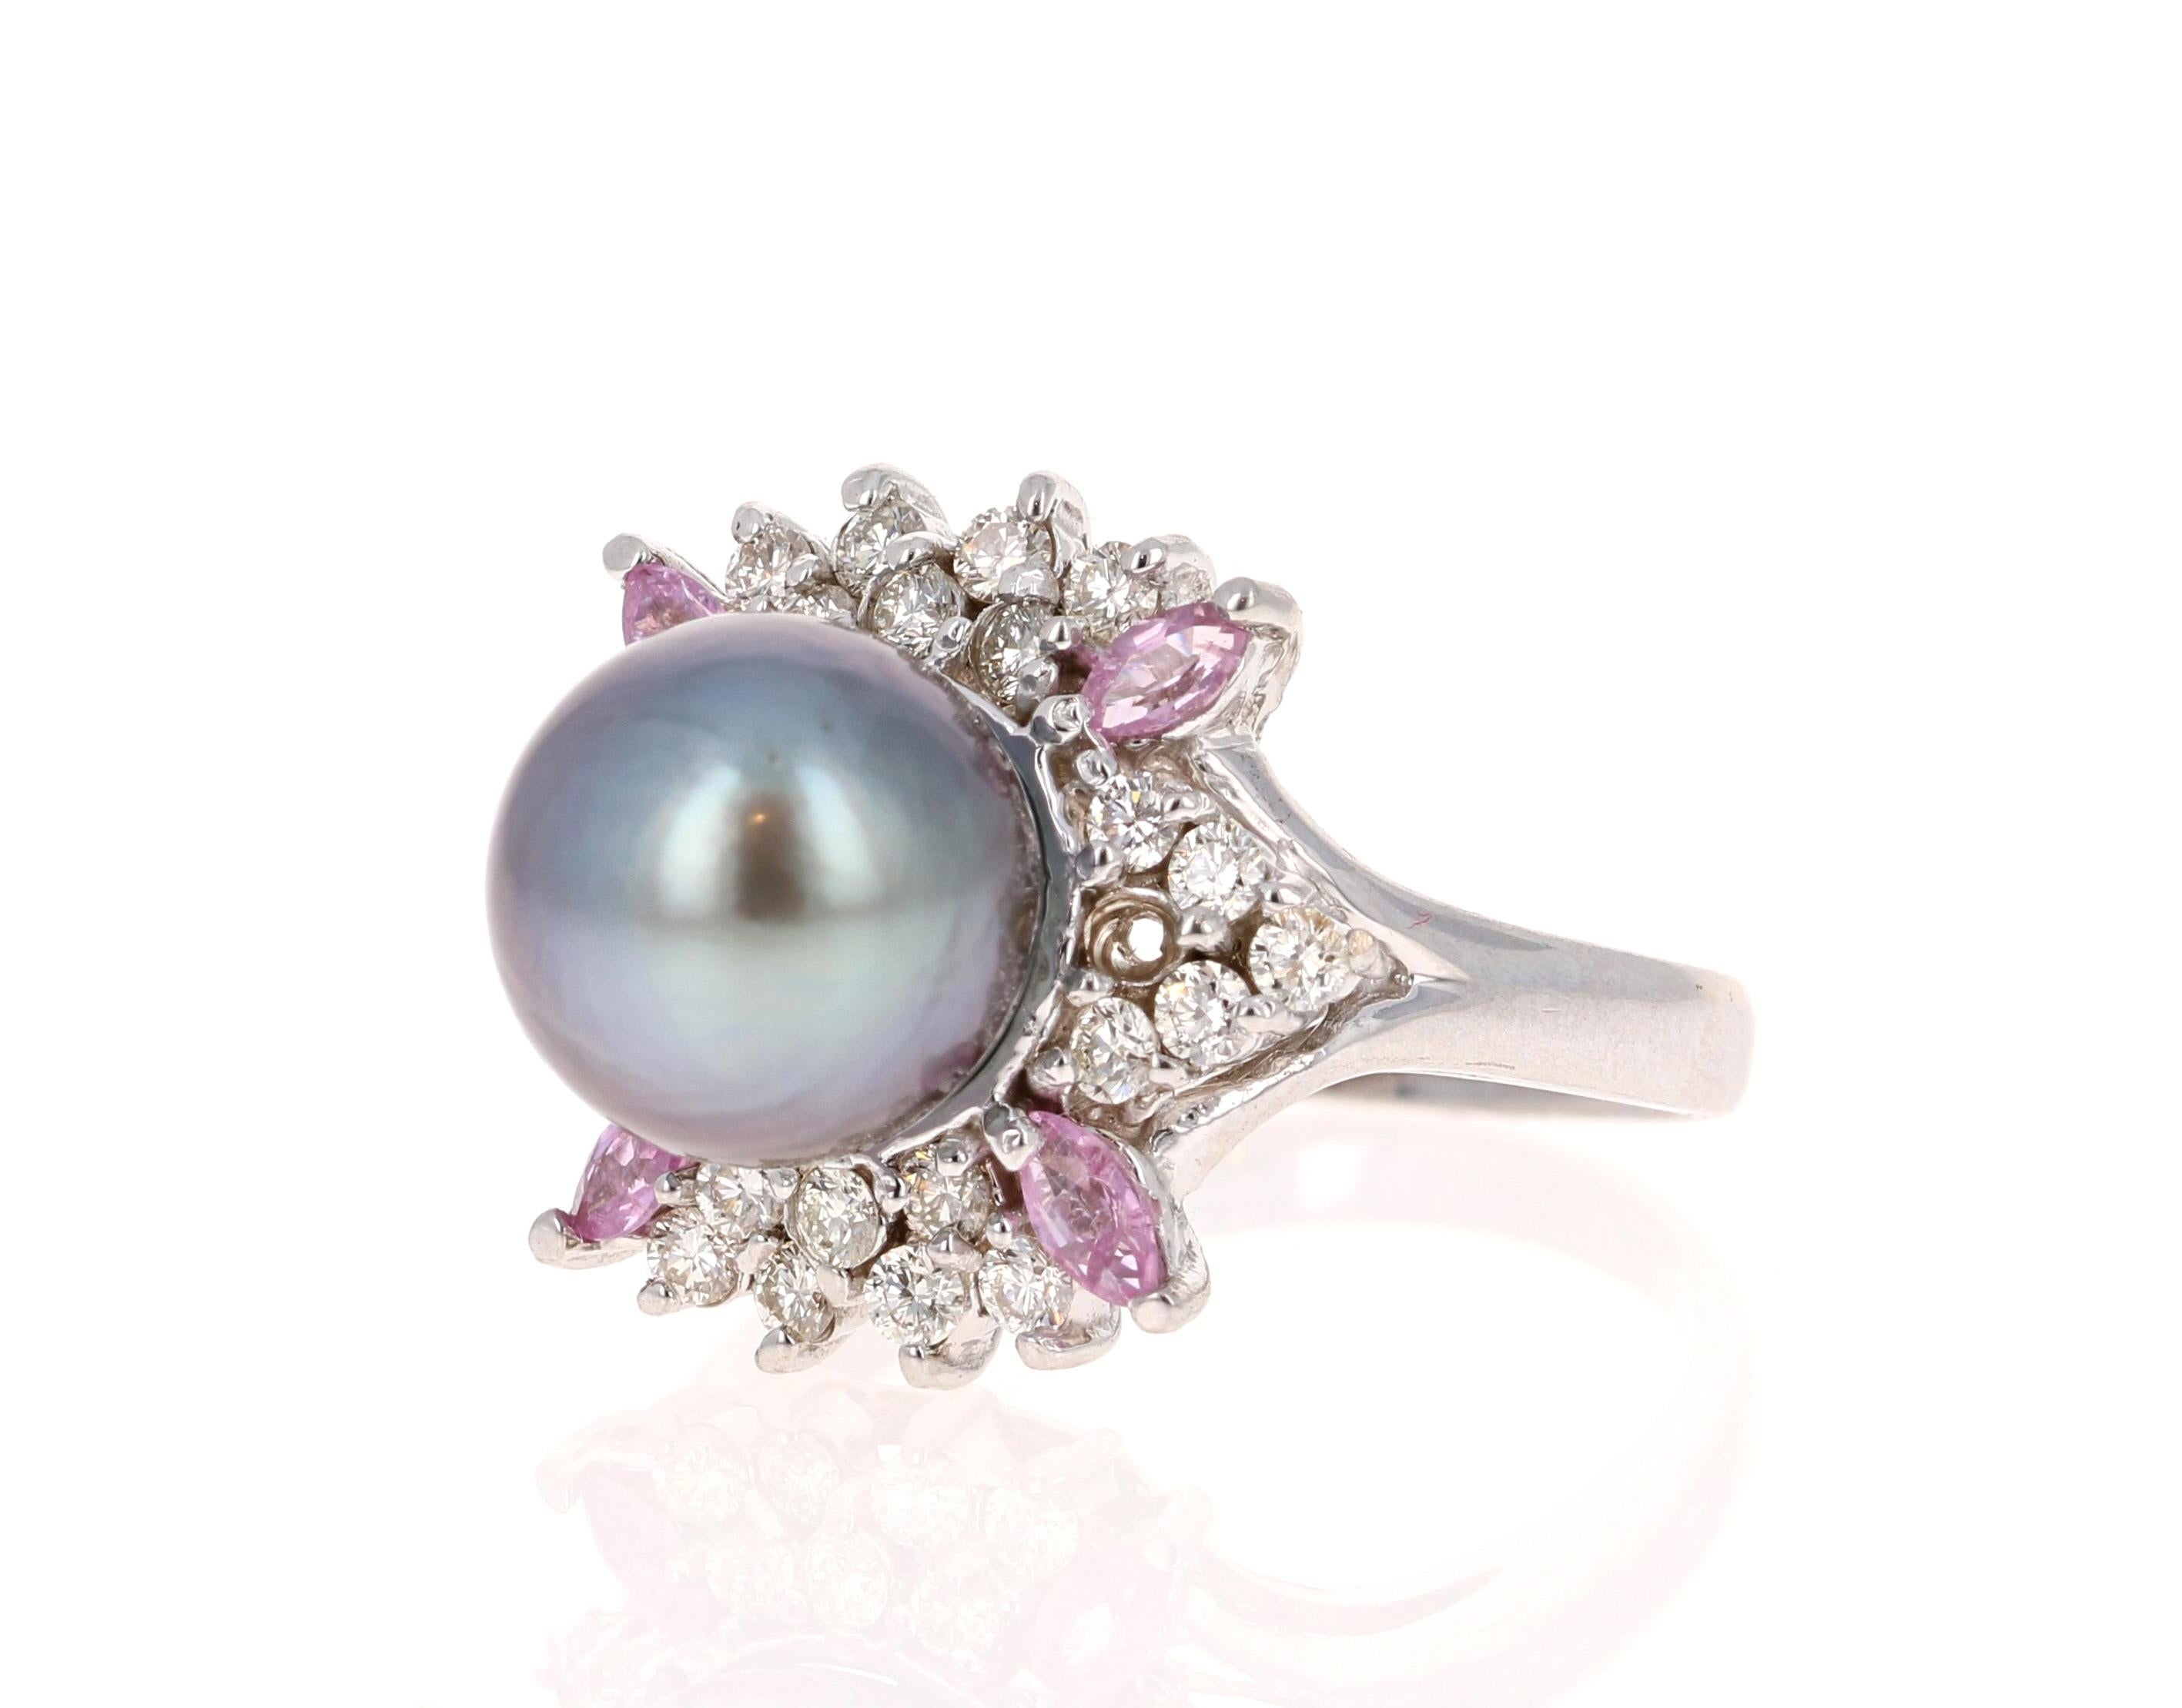 This beautiful flower like ring has a stunning 10mm Tahitian Pearl that is set in the center of the ring.  The pearl is surrounded by 28 Round Cut Diamonds that weigh 0.72 carats (Clarity:VS2 and Color:H)  and accented with 4 Marquise Cut Pink